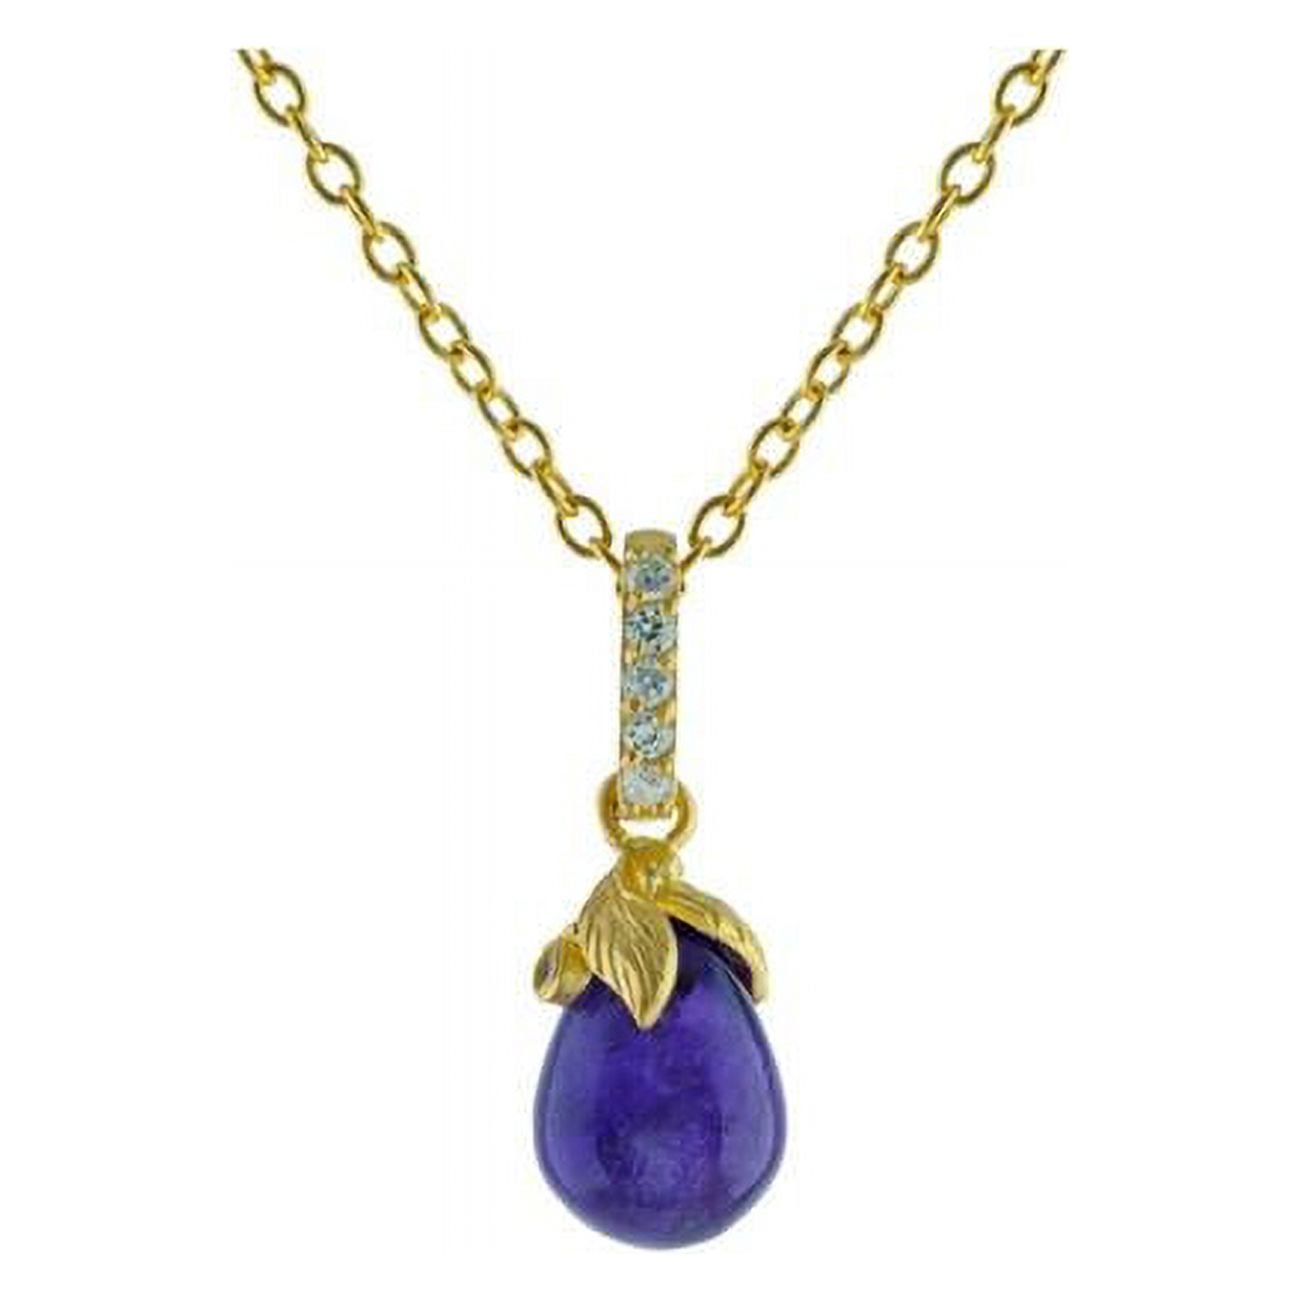 211390 16 In. 14k Gold Plated Sterling Silver Amethyst Flower Bulb Pendant Necklace